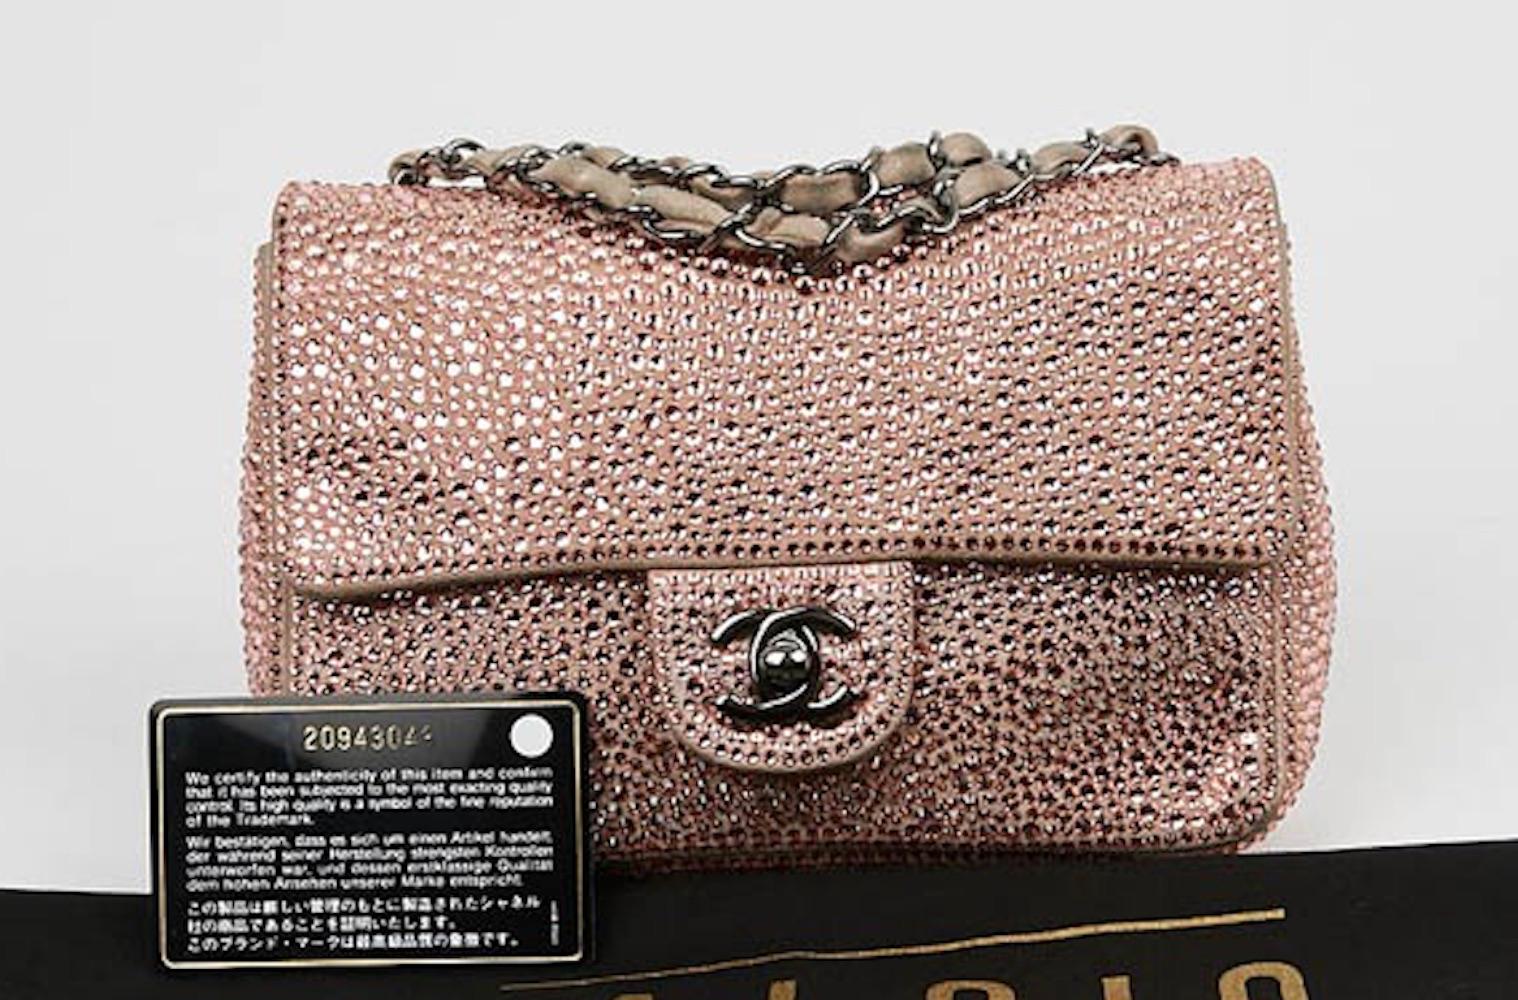 Chanel Limited Edition Timeless Bag In Pink Velvet Calf Leather  5